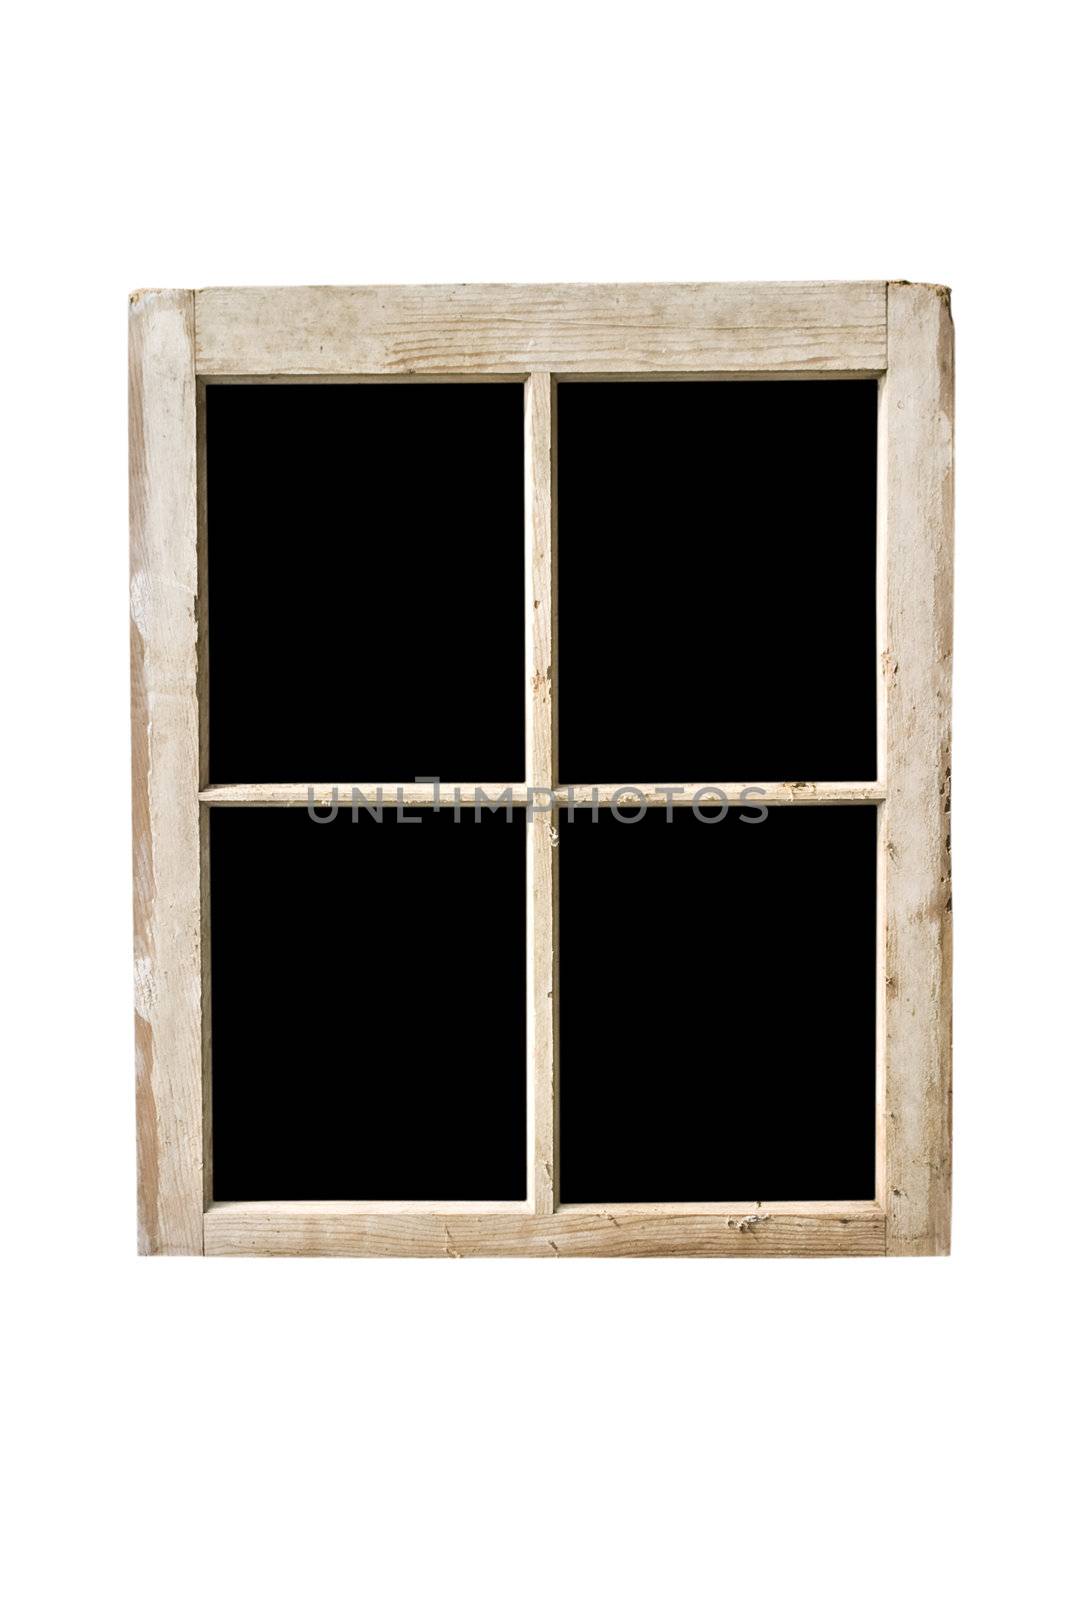 Old residential window frame isolated on white with panes blacked out.